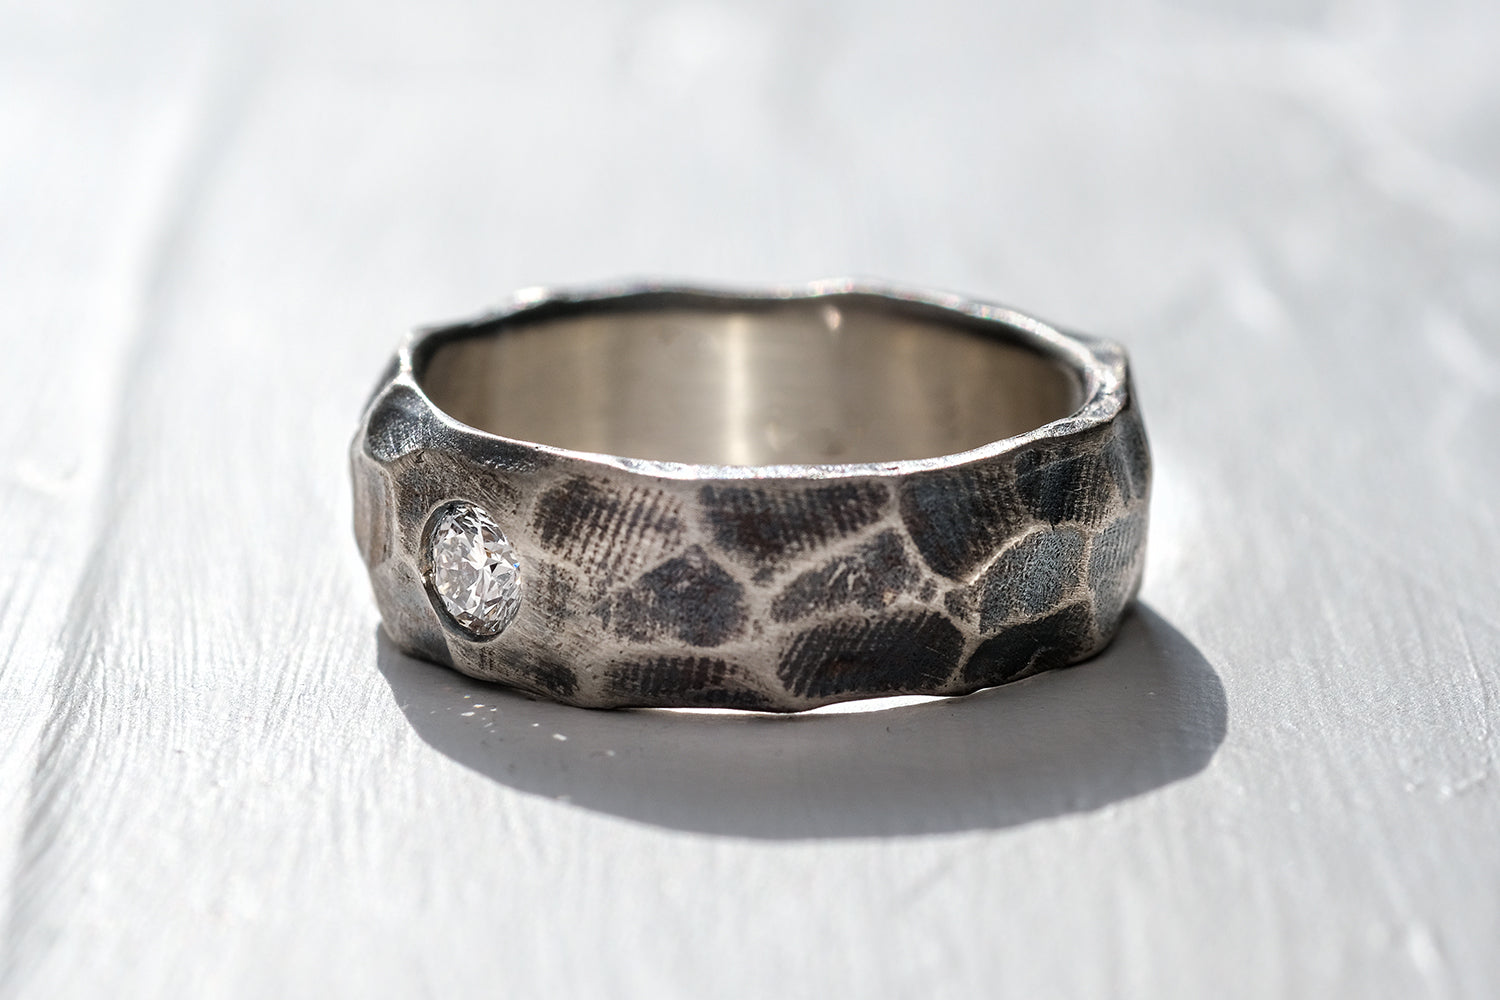 Silver Ring For Men - Roughly Hammered Finish Set With A Diamond